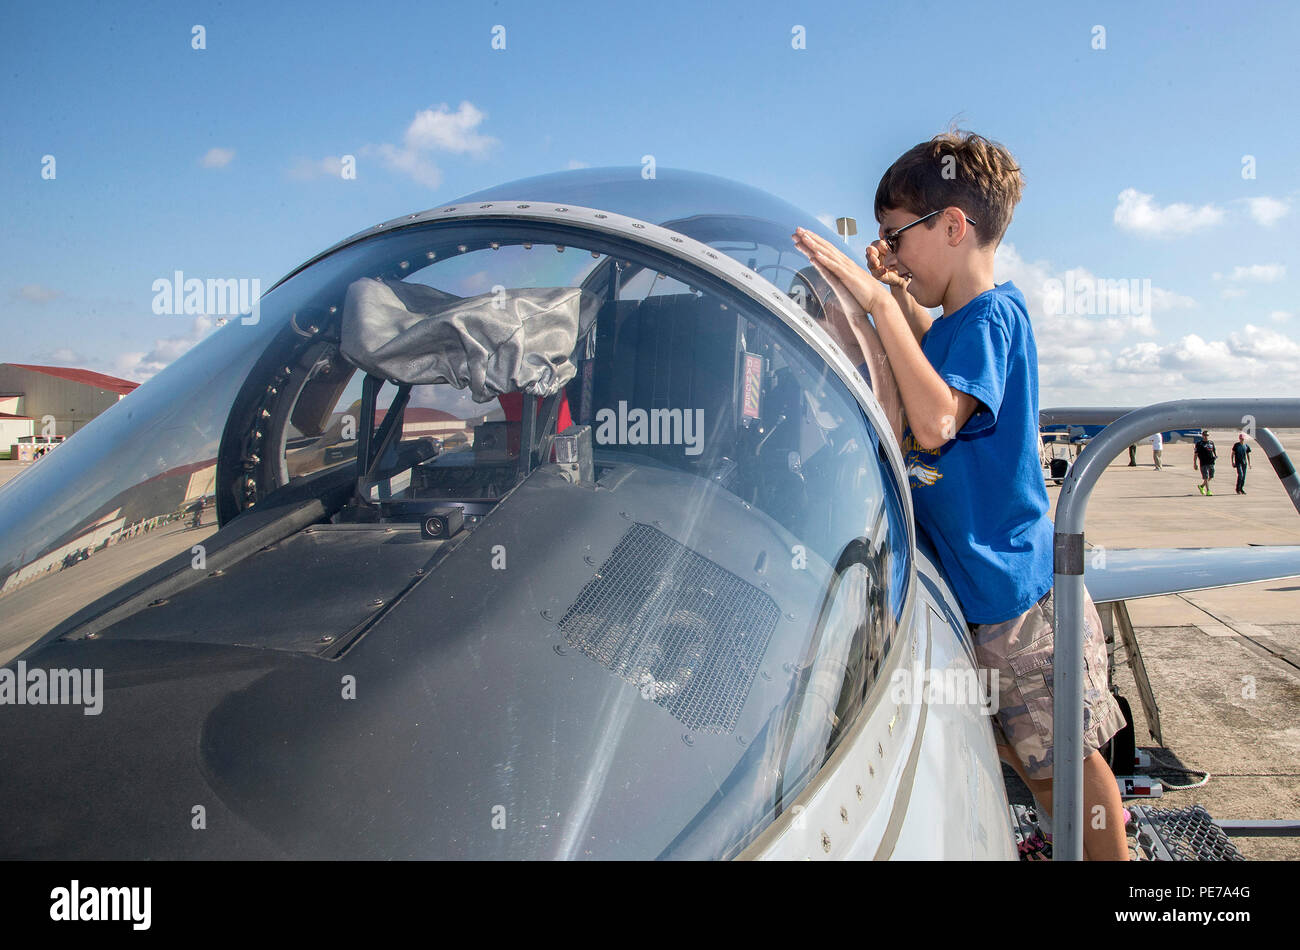 Brady Hoffmeyer looks inside the cockpit of a T-38 during the 2015 Joint Base San Antonio Air Show and Open House Nov. 1, 2015, at JBSA-Randolph, Texas. Air shows allow the Air Force to display the capabilities of our aircraft to the American taxpayer through aerial demonstrations and static displays and allowing attendees to get up close and personal to see some of the equipment and aircraft used by the U.S. military today. (U.S. Air Force photo by Johnny Saldivar) Stock Photo